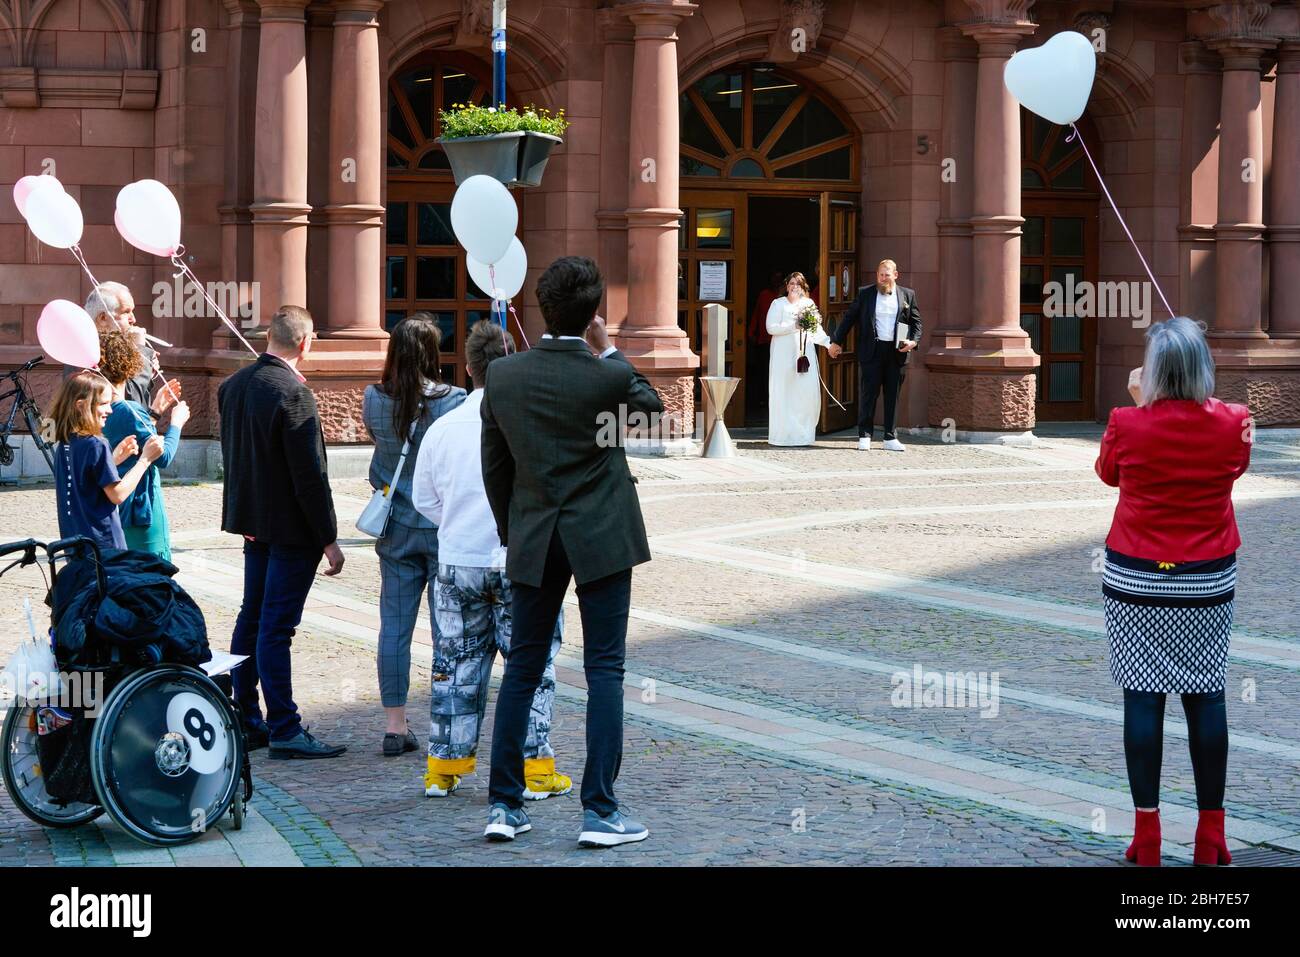 Dortmund, April 24th, 2020: Wedding in Corona times. A couple married on April 24. In front of the registry office, family members and friends congratulated them in the appropriate safety distance. Stock Photo